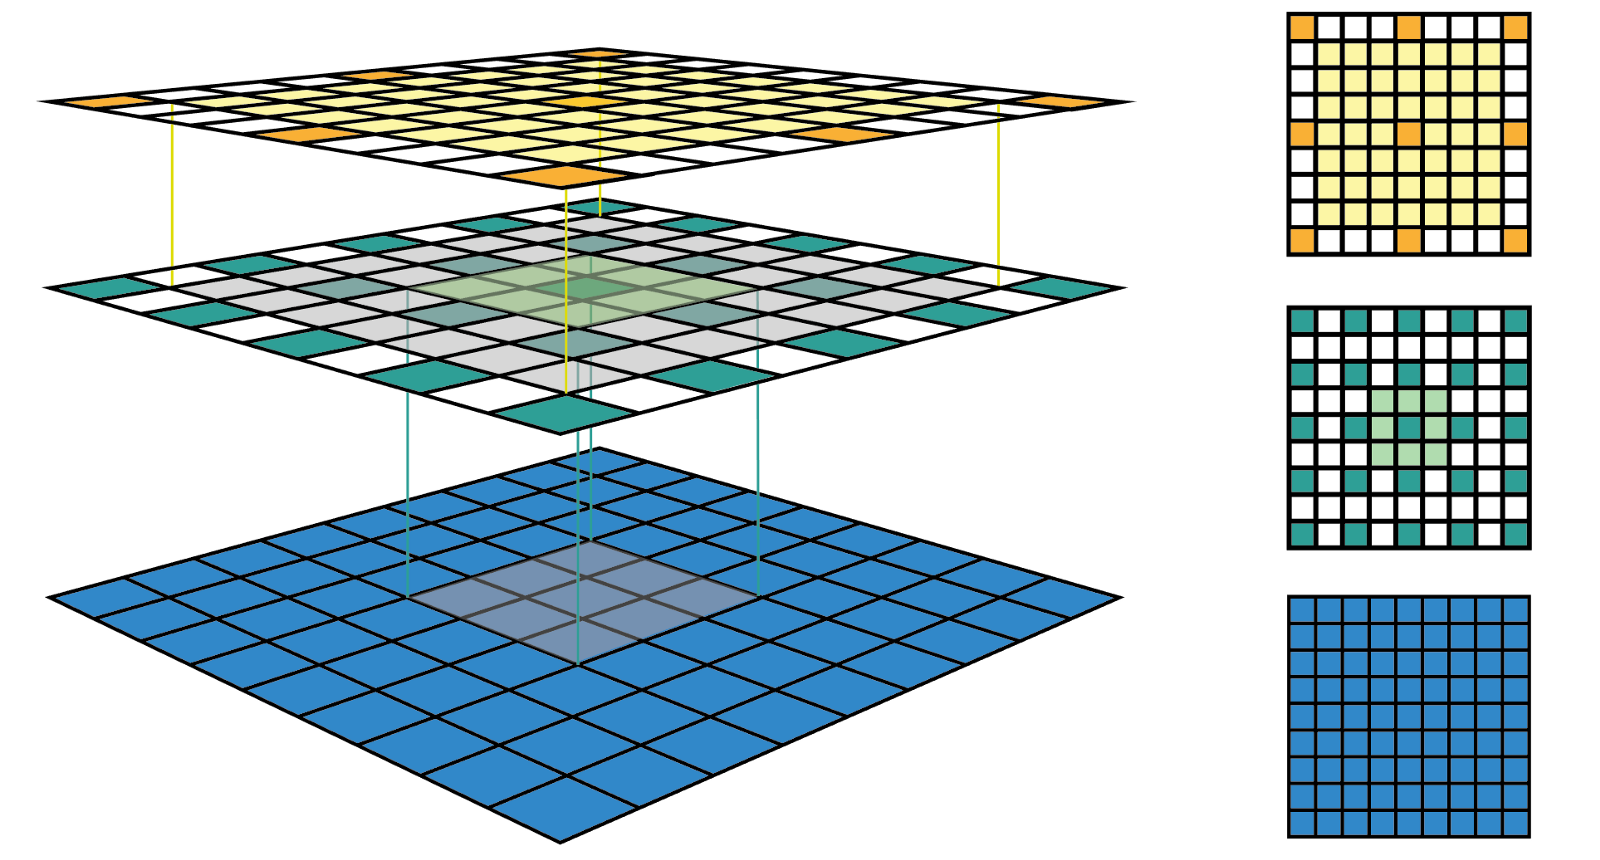 
Figure 2: Another fixed-sized CNN feature map representation. The same convolution C is applied on a bigger input map with i = 7x7. I drew the receptive field bounding box around the center feature and removed the padding grid for a clearer view. The fixed-sized CNN feature map can be presented in 3D (Left) or 2D (Right).